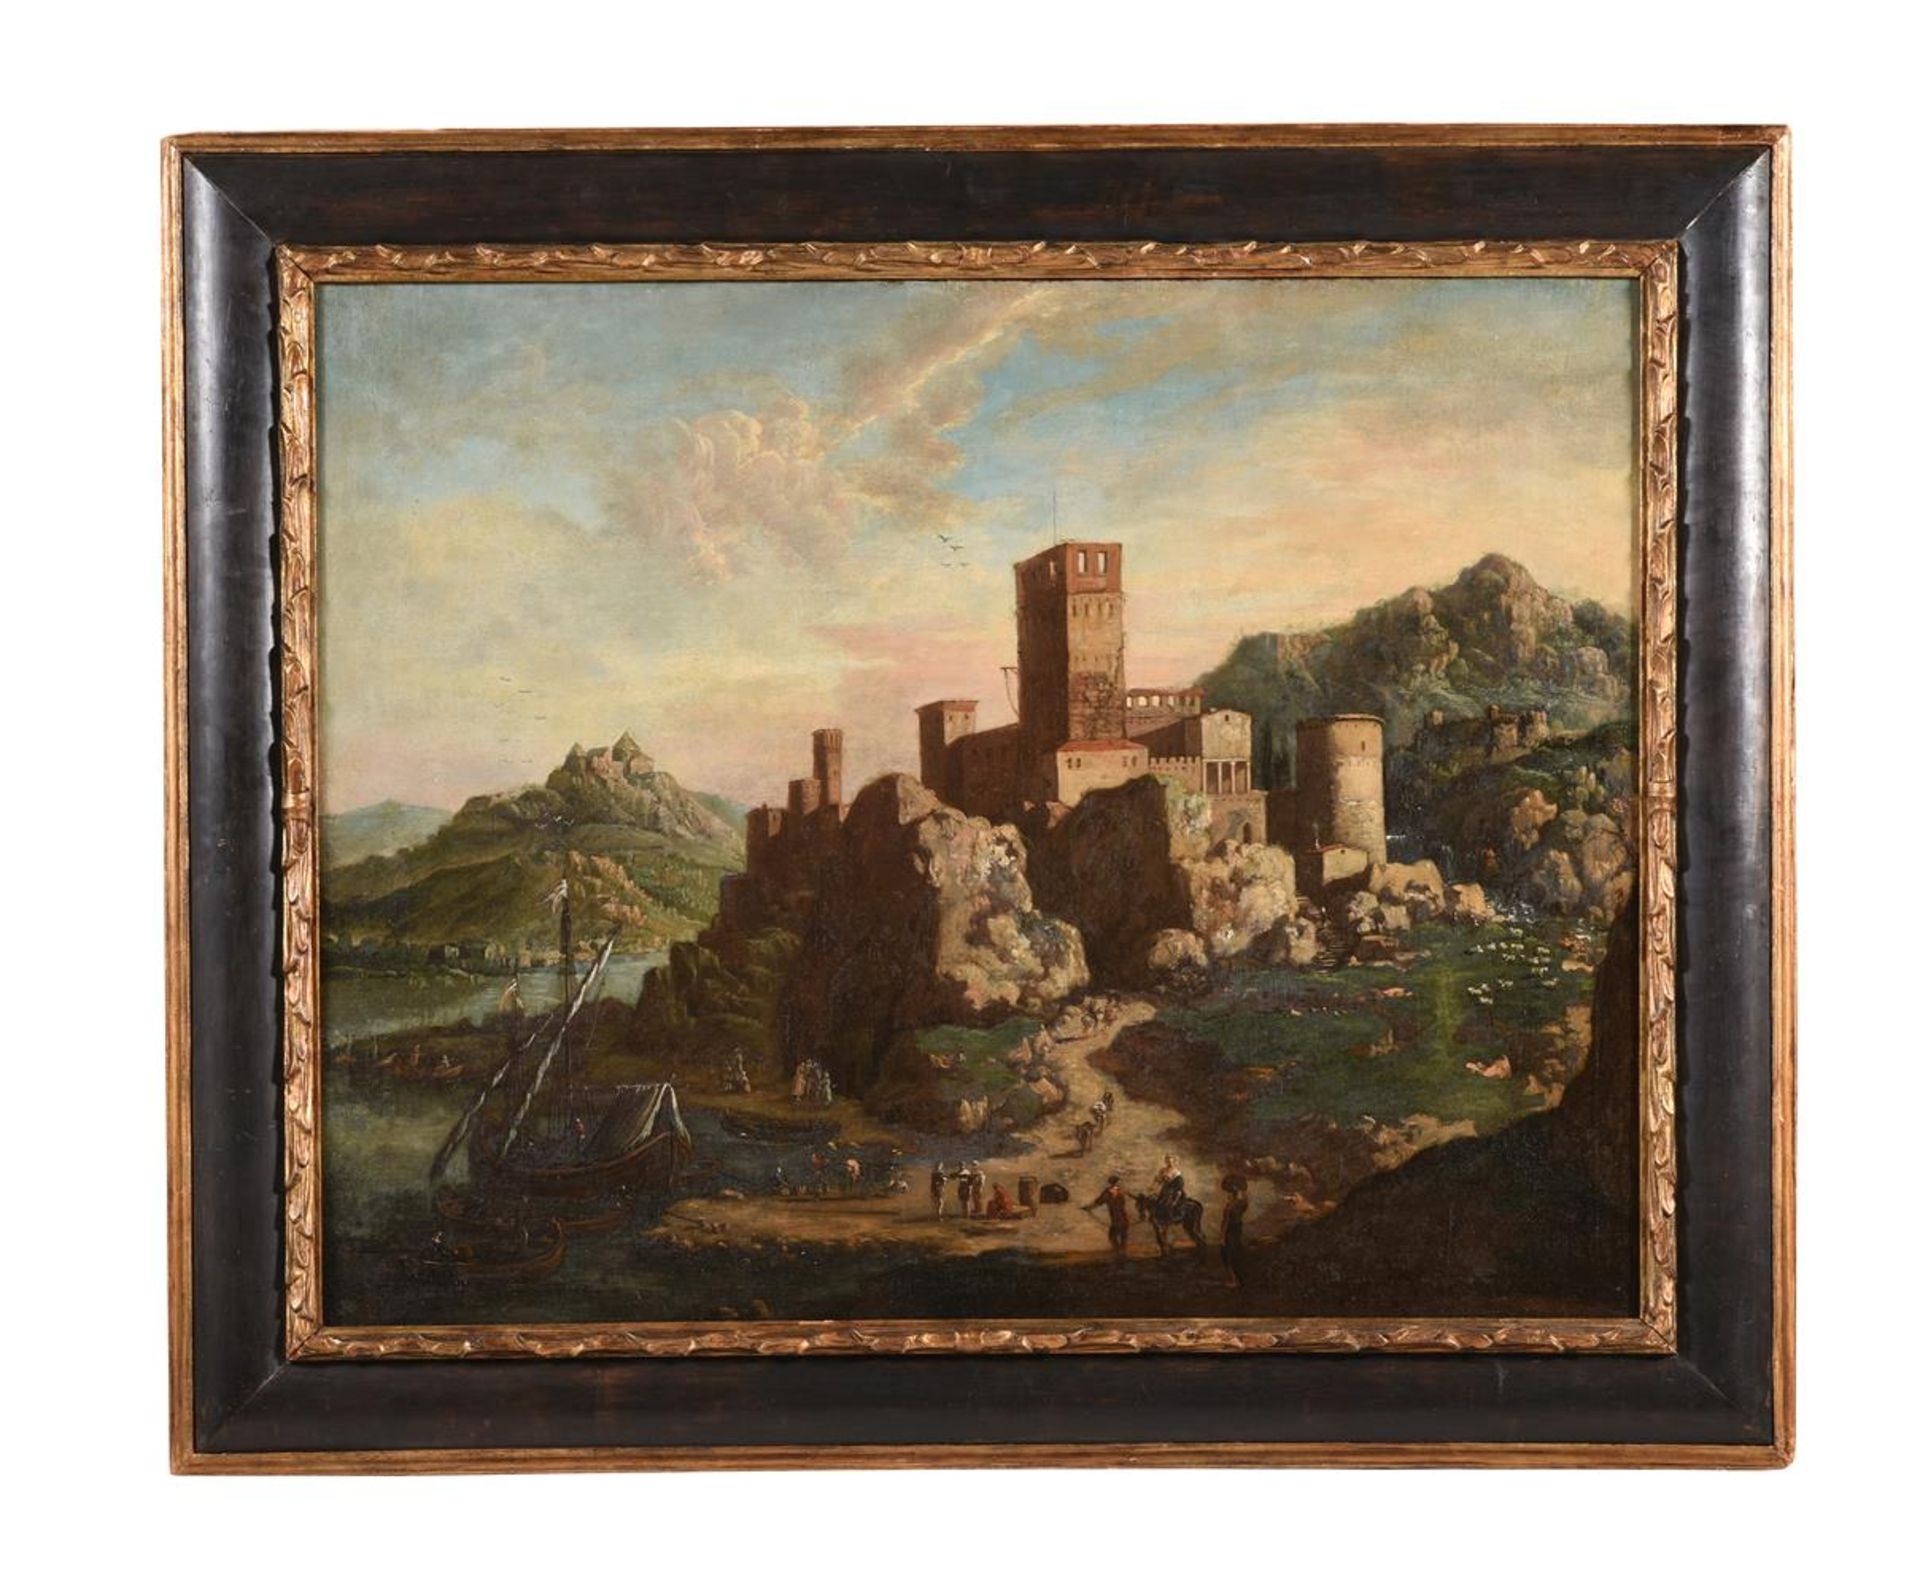 ITALIAN SCHOOL (17TH CENTURY), AN ITALIANATE COASTAL INLET WITH A FORTIFIED HILLTOP TOWN - Bild 2 aus 3